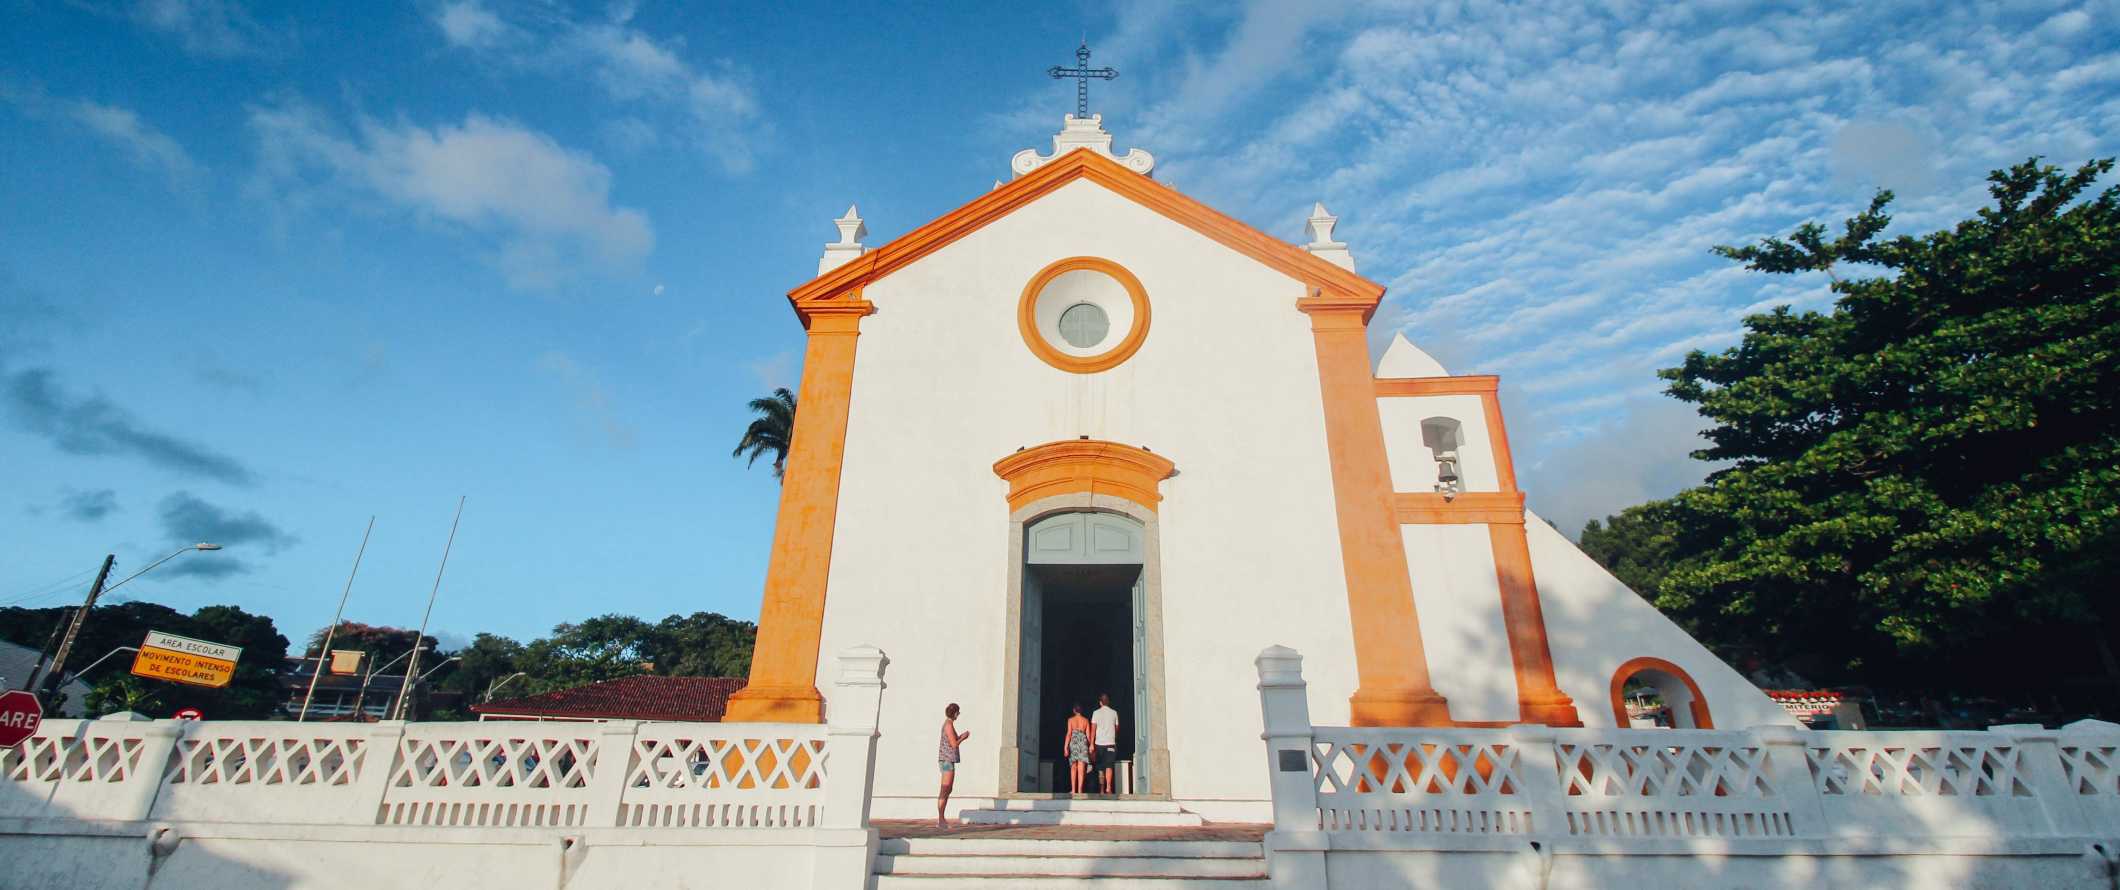 White-washed colonial church with bright orange trim in Florianopolis, Brazil